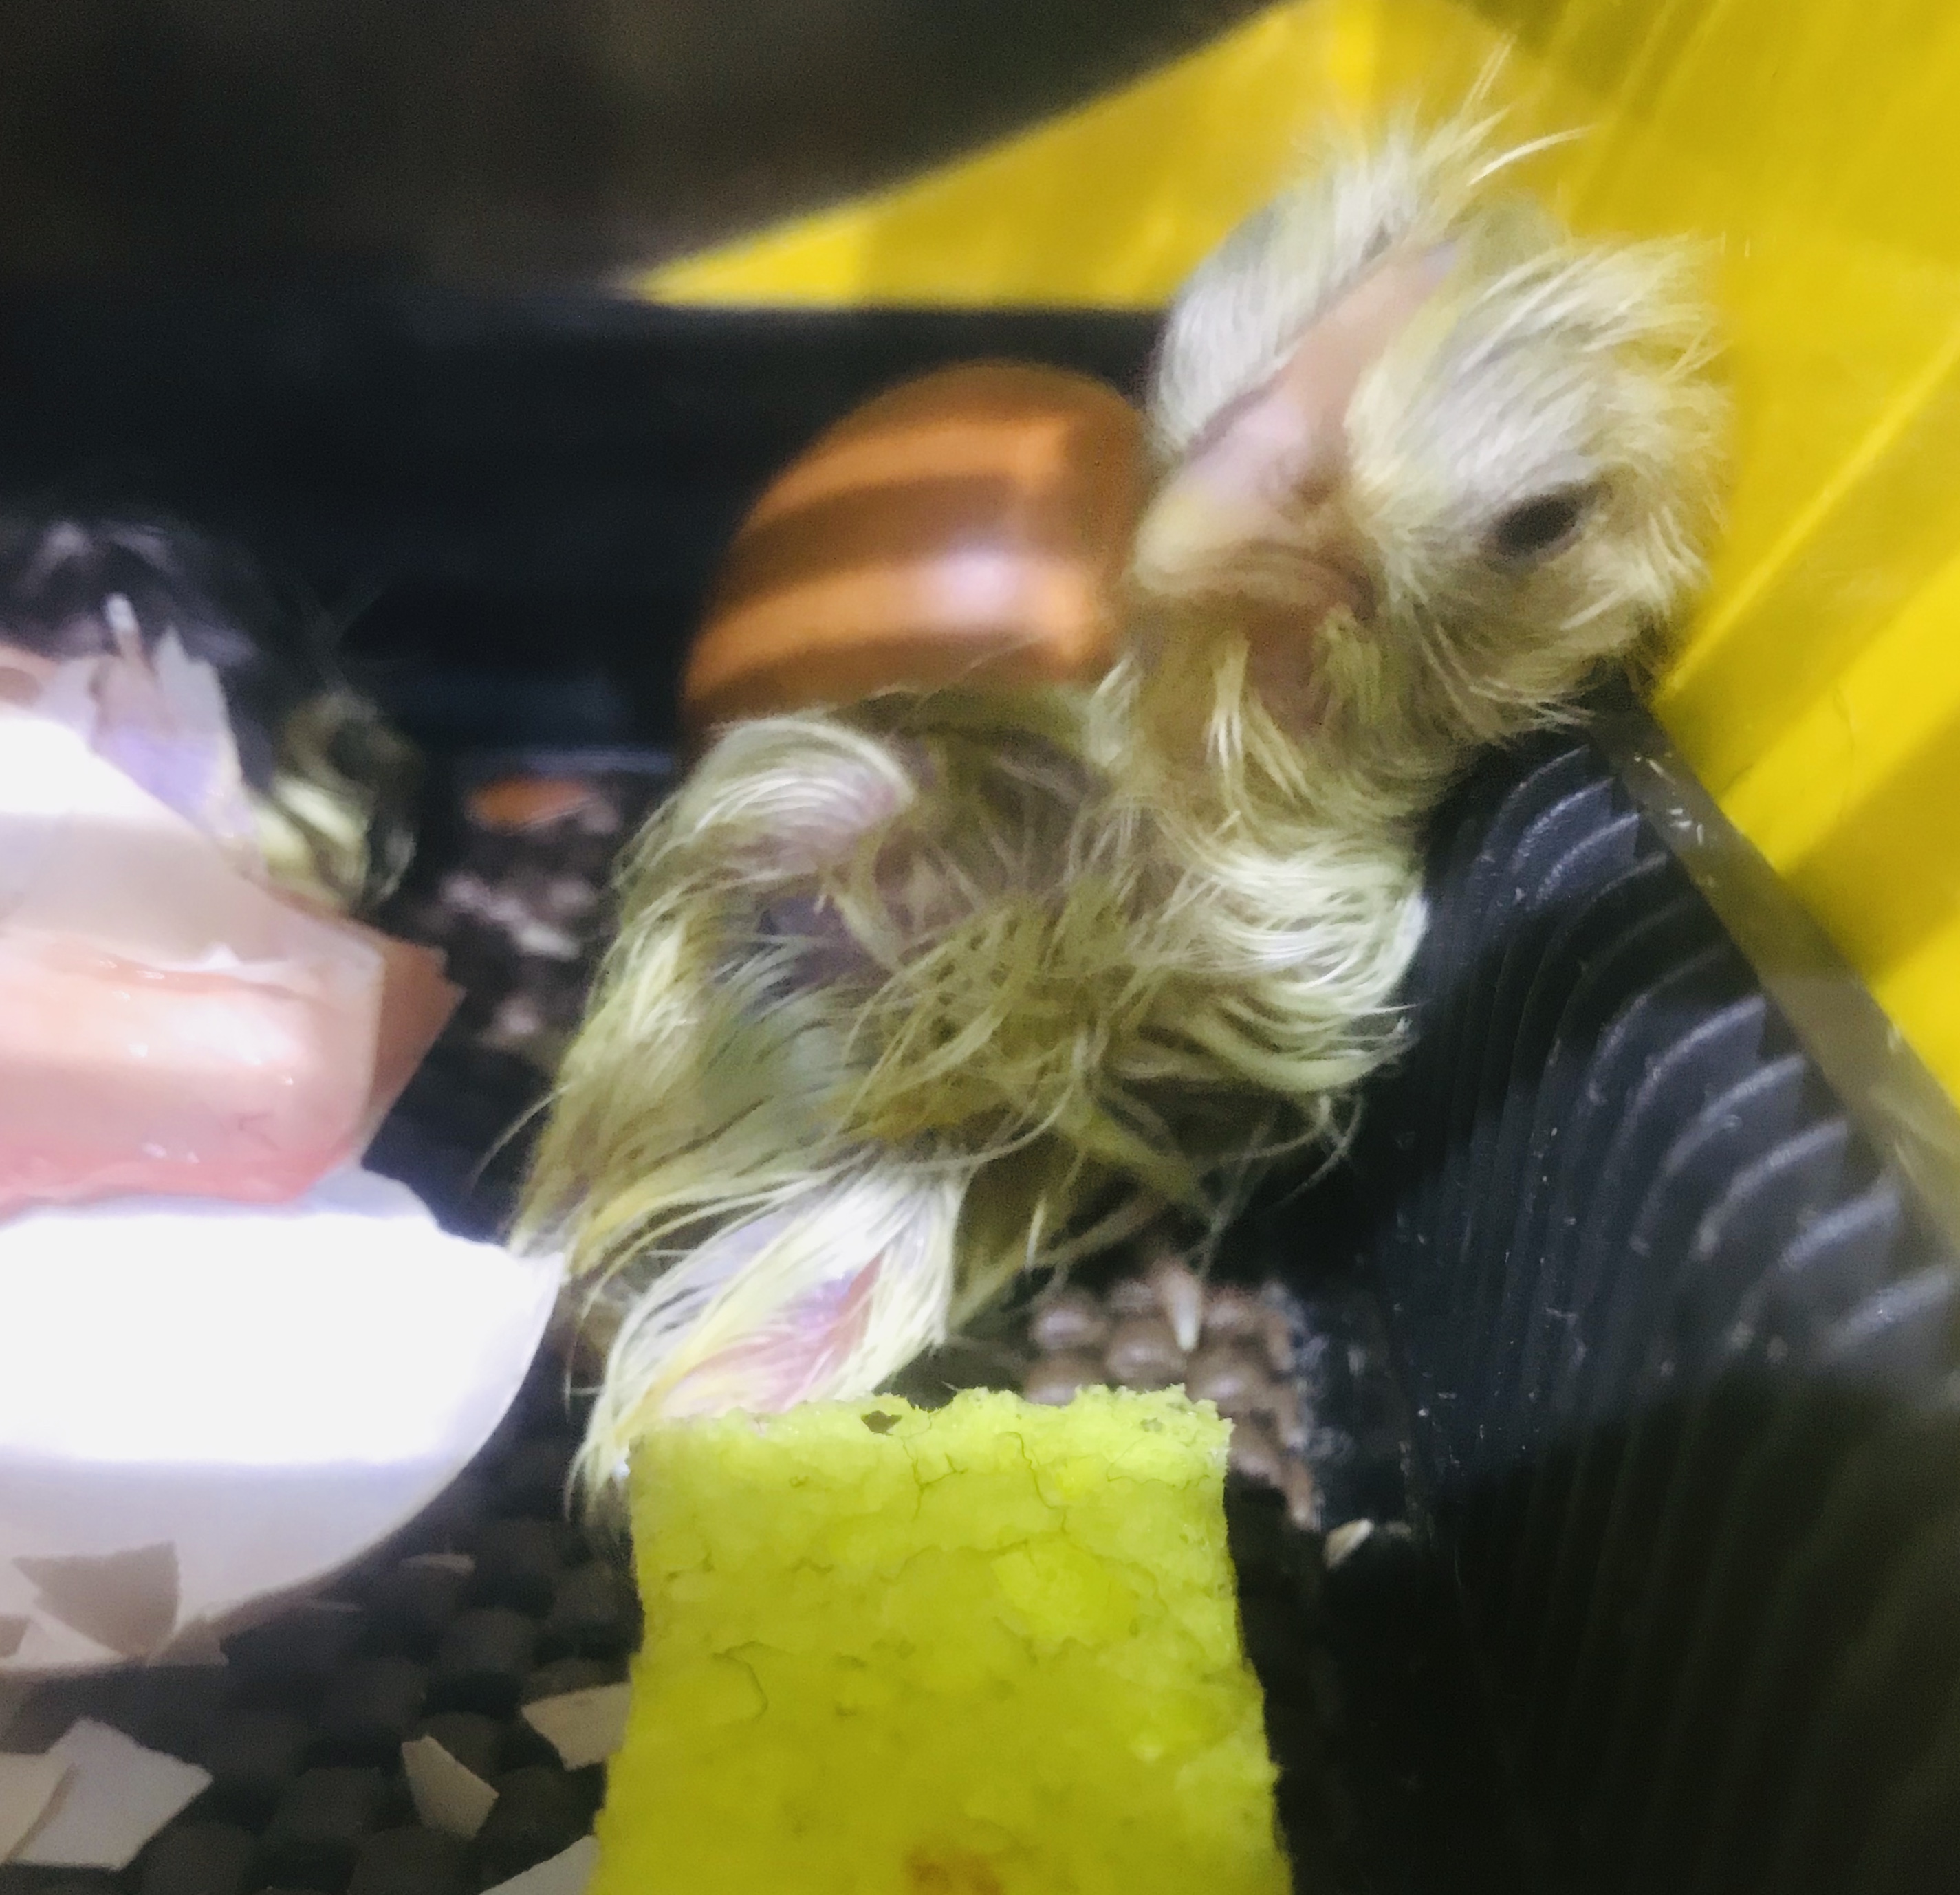 Chick in Incubator with Wet Sponge